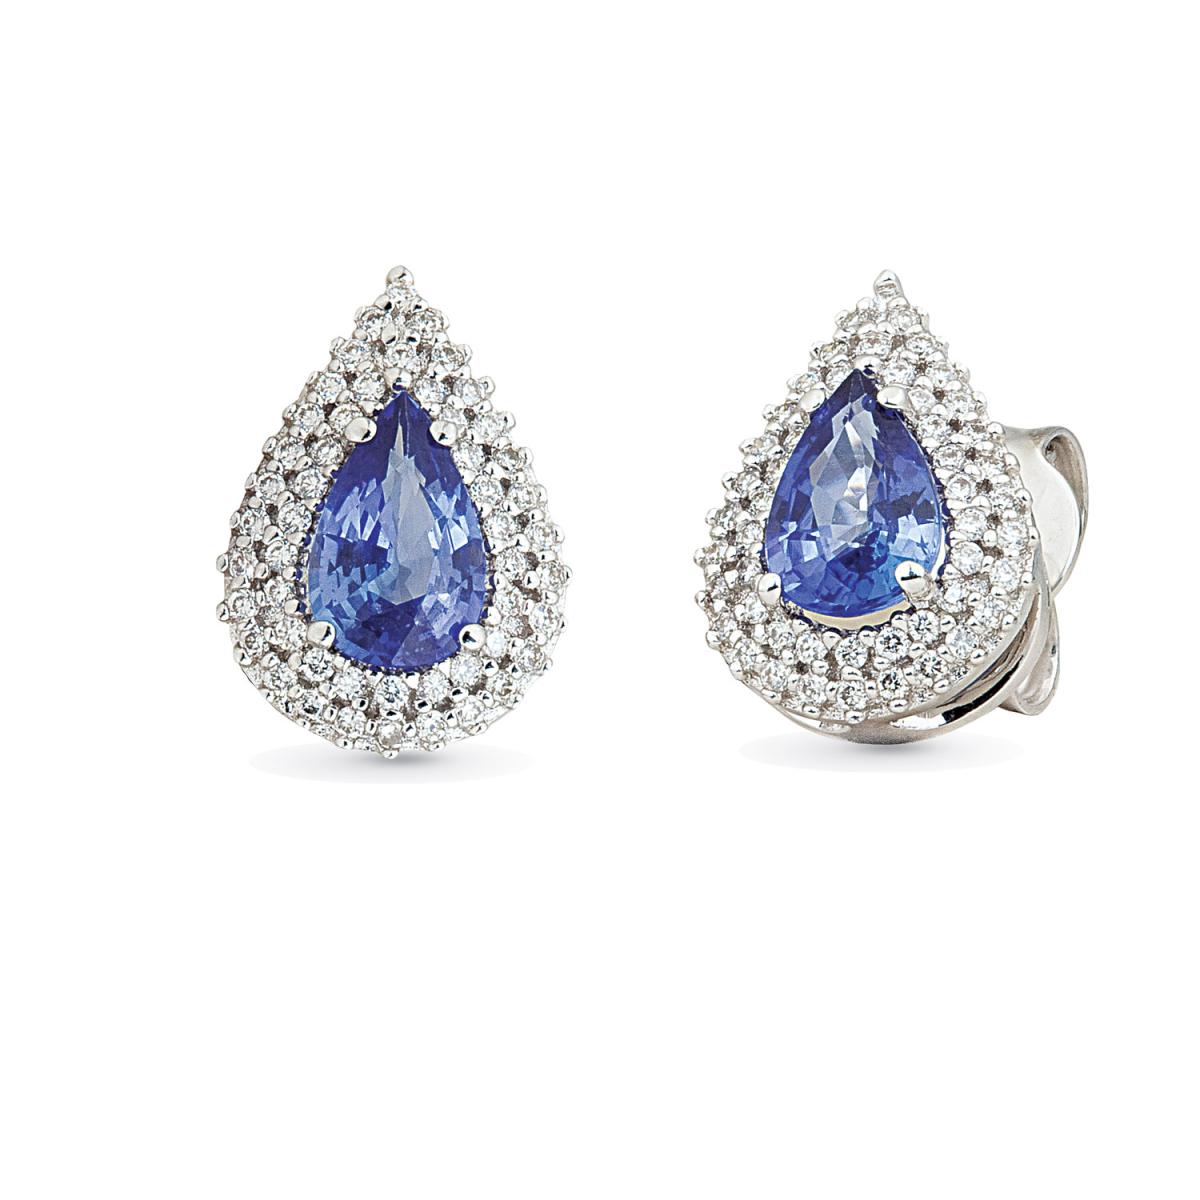 18kt white gold earrings with diamonds and central precious stones - OD305